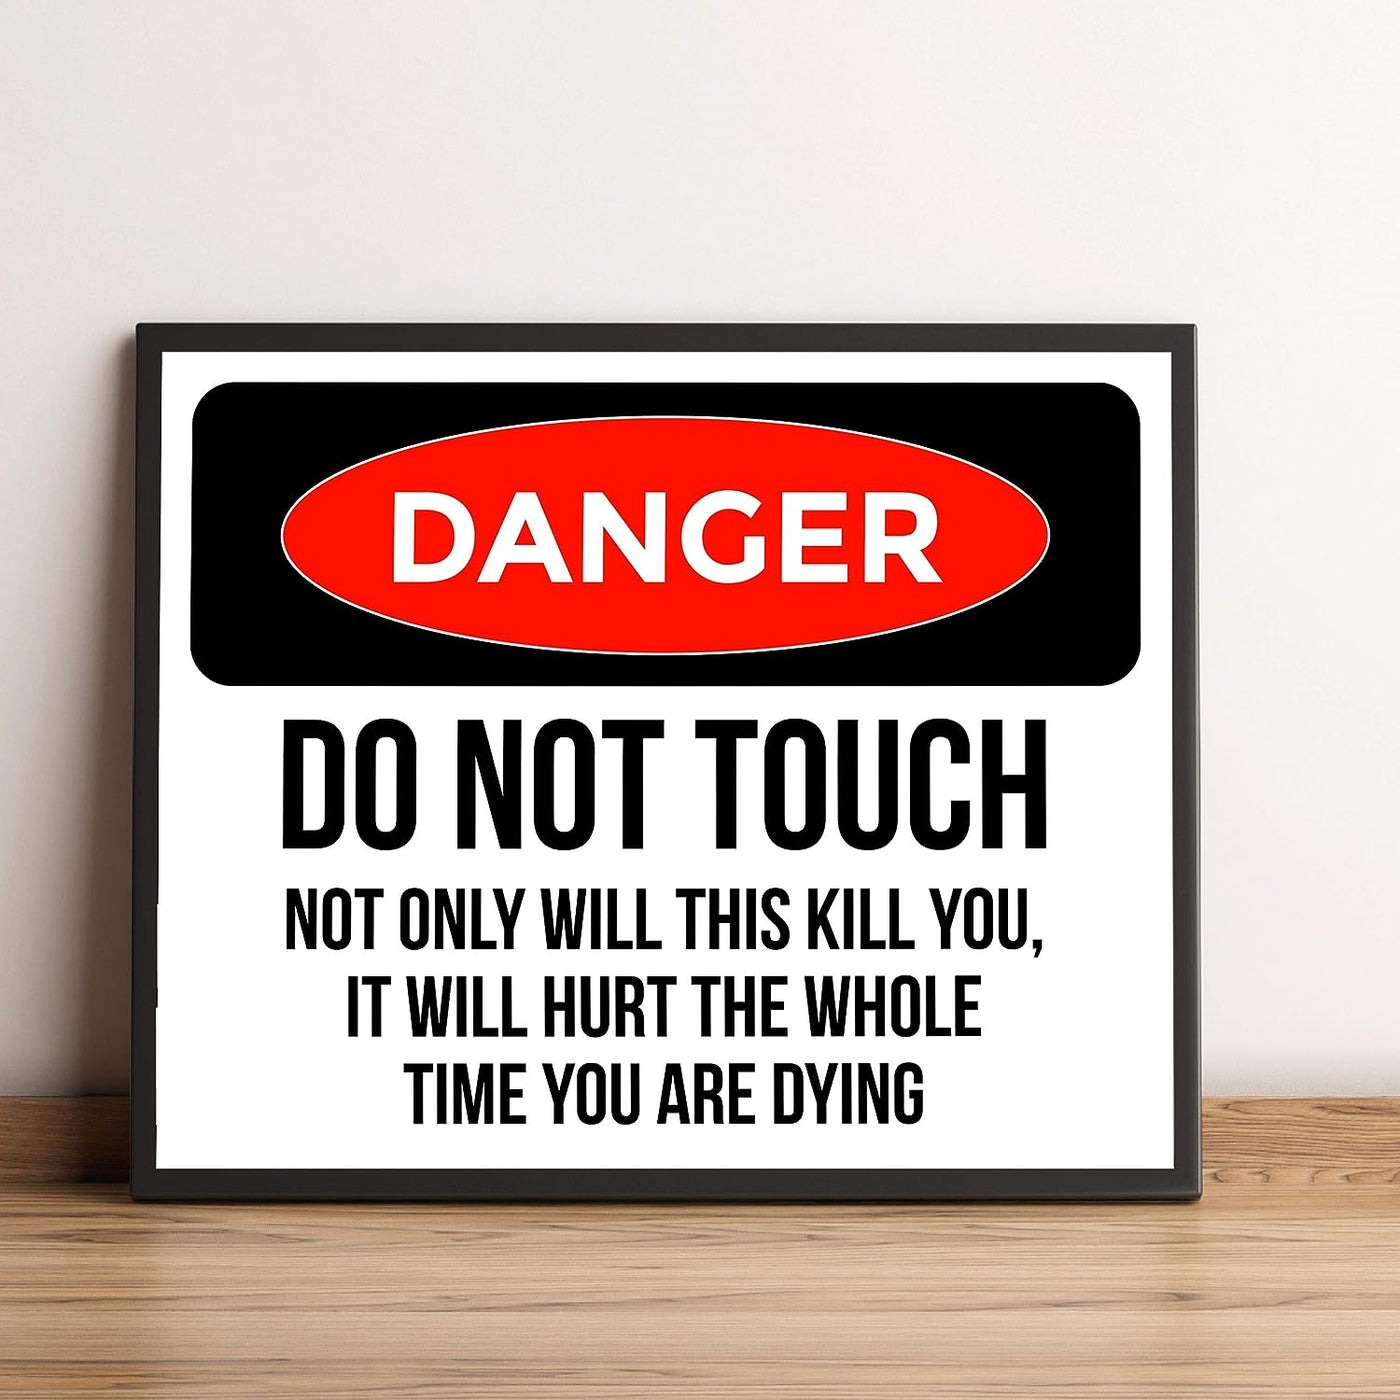 Danger-Do Not Touch-It Will Hurt Funny Wall Art Sign-10 x 8" Sarcastic Replica Warning Sign Print-Ready to Frame. Typographic Design. Humorous Decor for Home-Office-Shop-Bar-Cave. Fun Novelty Gift!